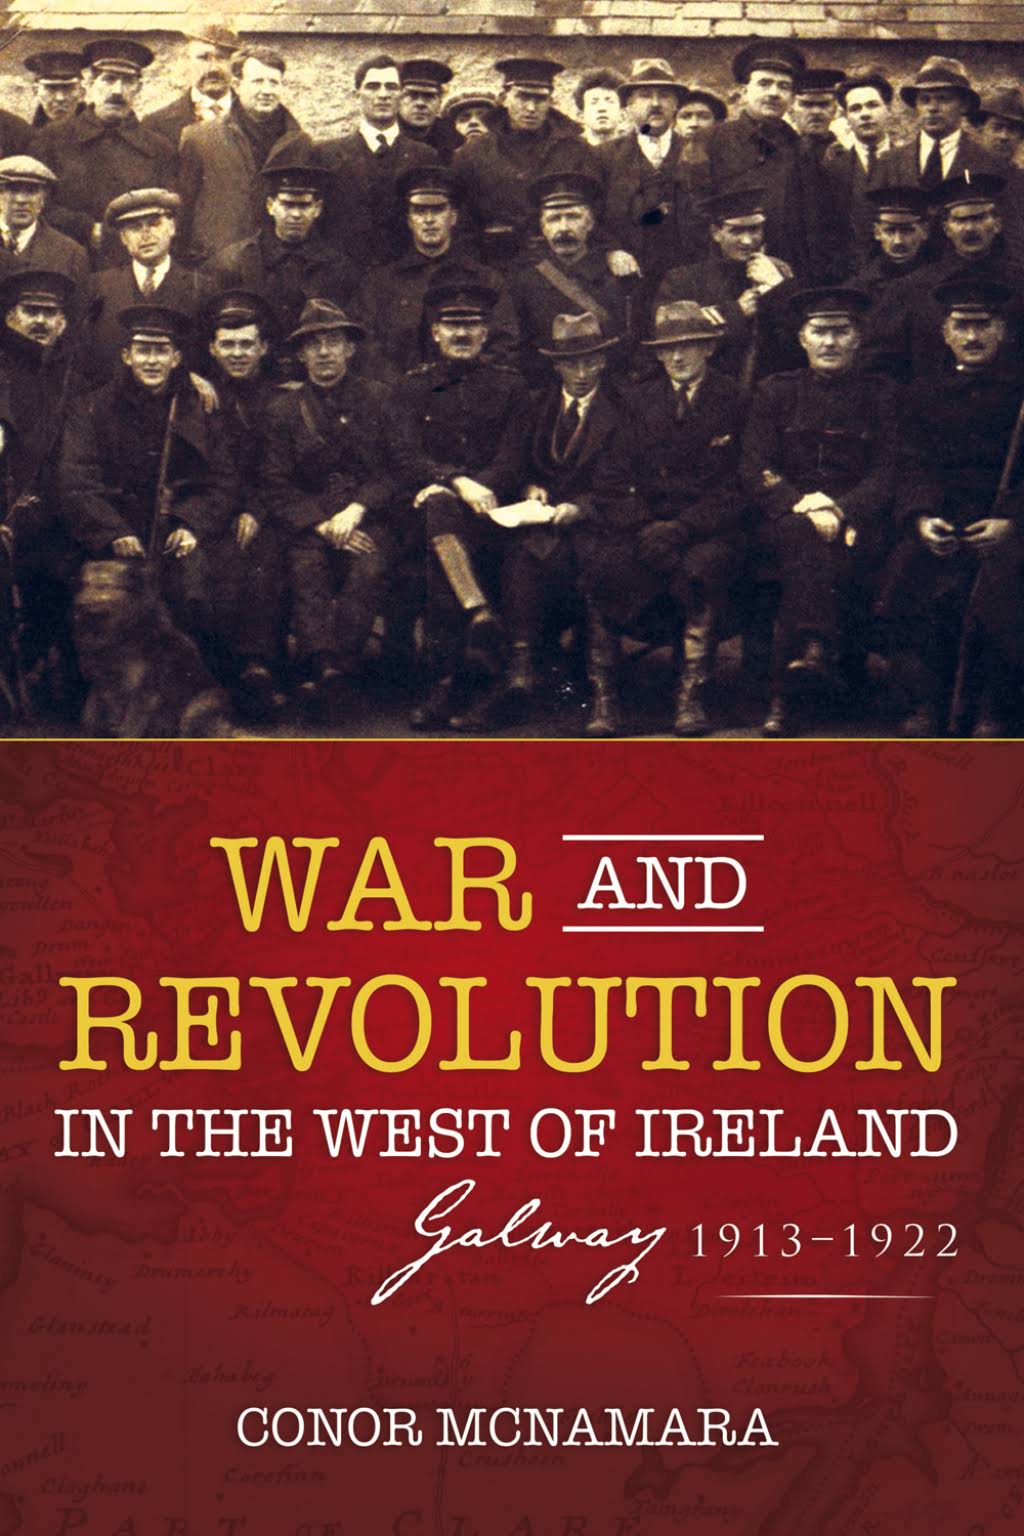 War and Revolution in the West of Ireland: Galway, 1913 to 1922 - Dr. Conor McNamara